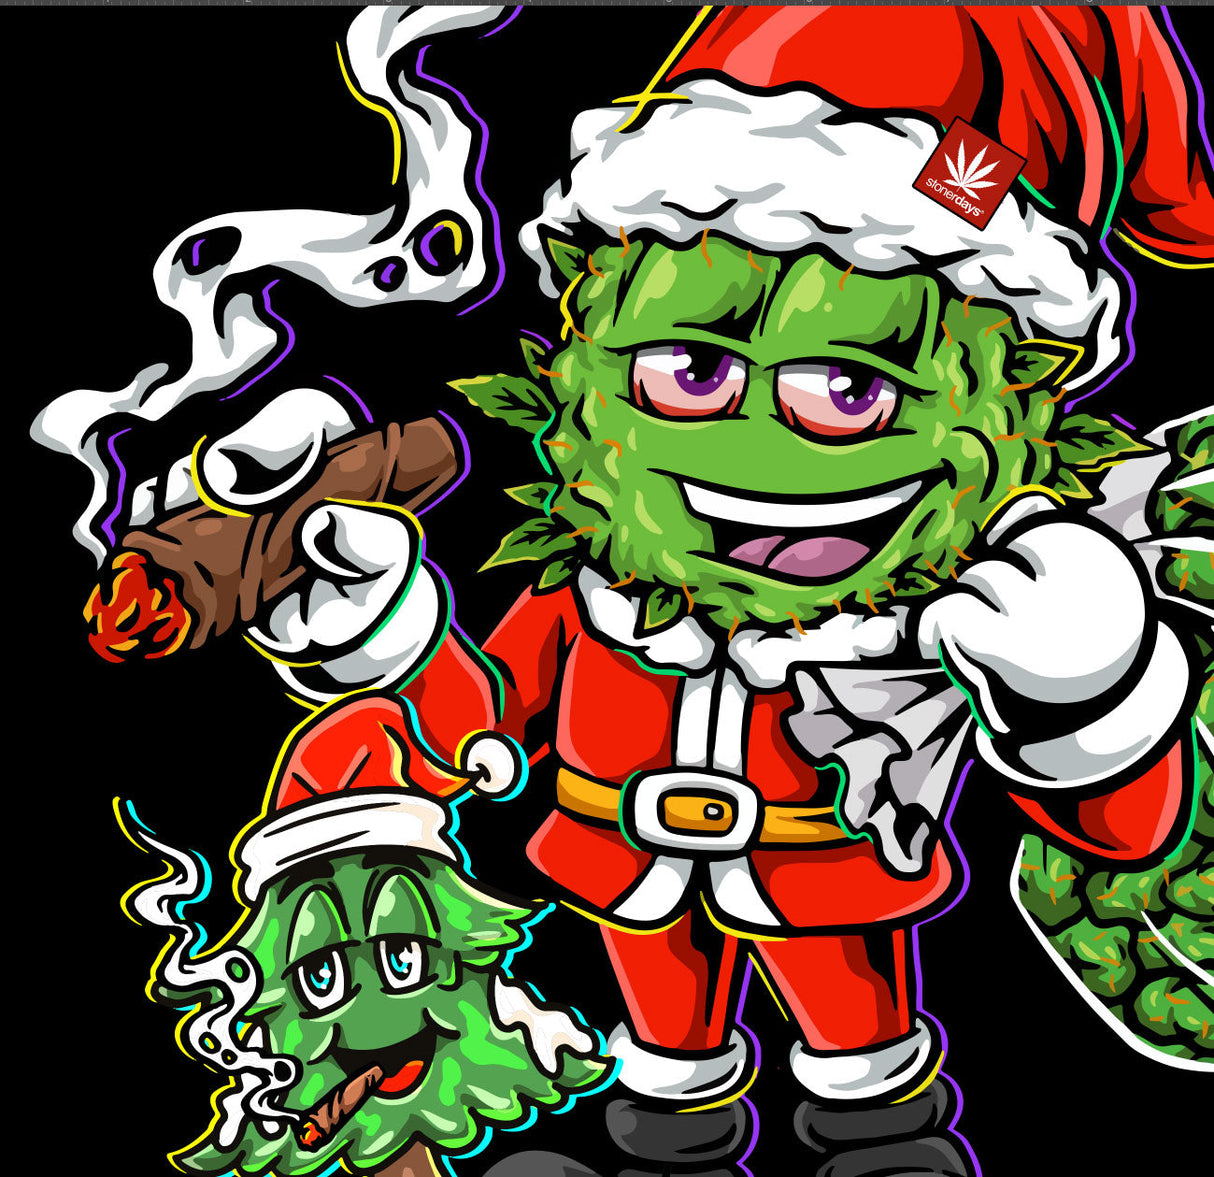 StonerDays 'I'm Here For The Trees' Tee featuring a festive graphic of a green character in Santa attire